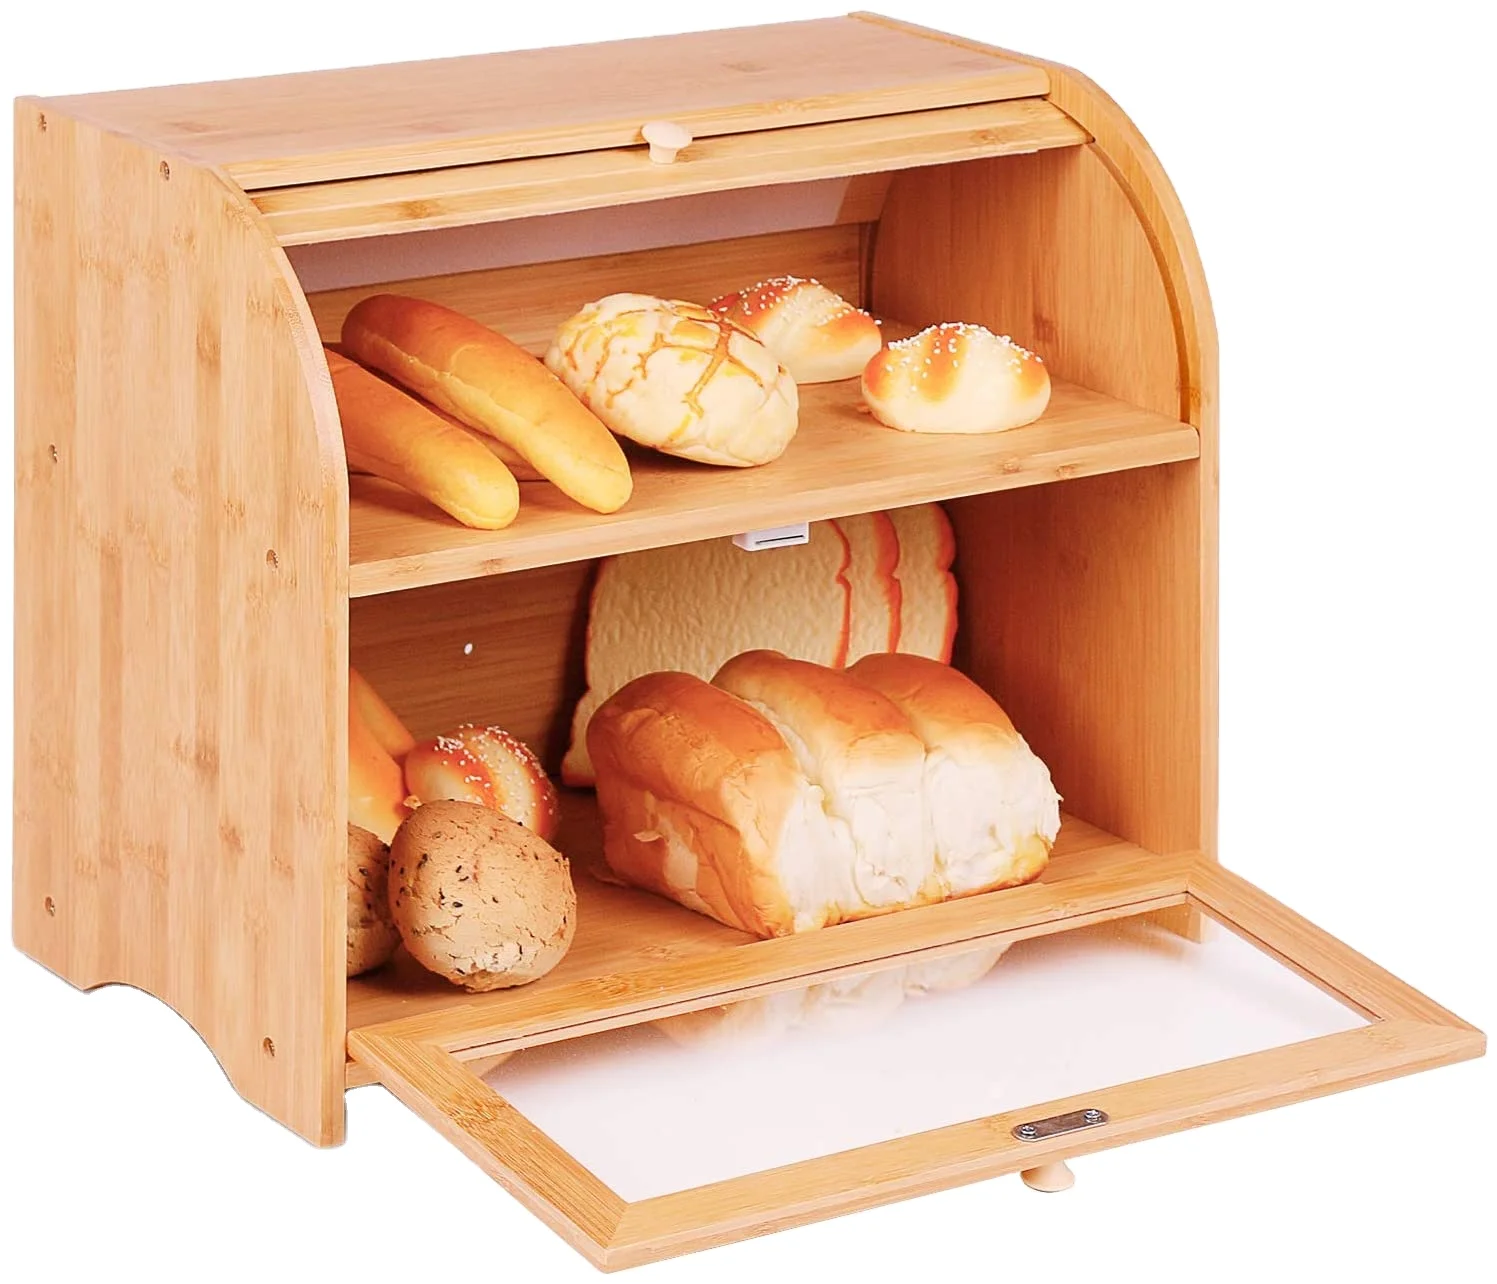 

2 Layer Bamboo Roll Top Bread Box Large Capacity Bread Keeper Kitchen Food Storage with Transparent Window